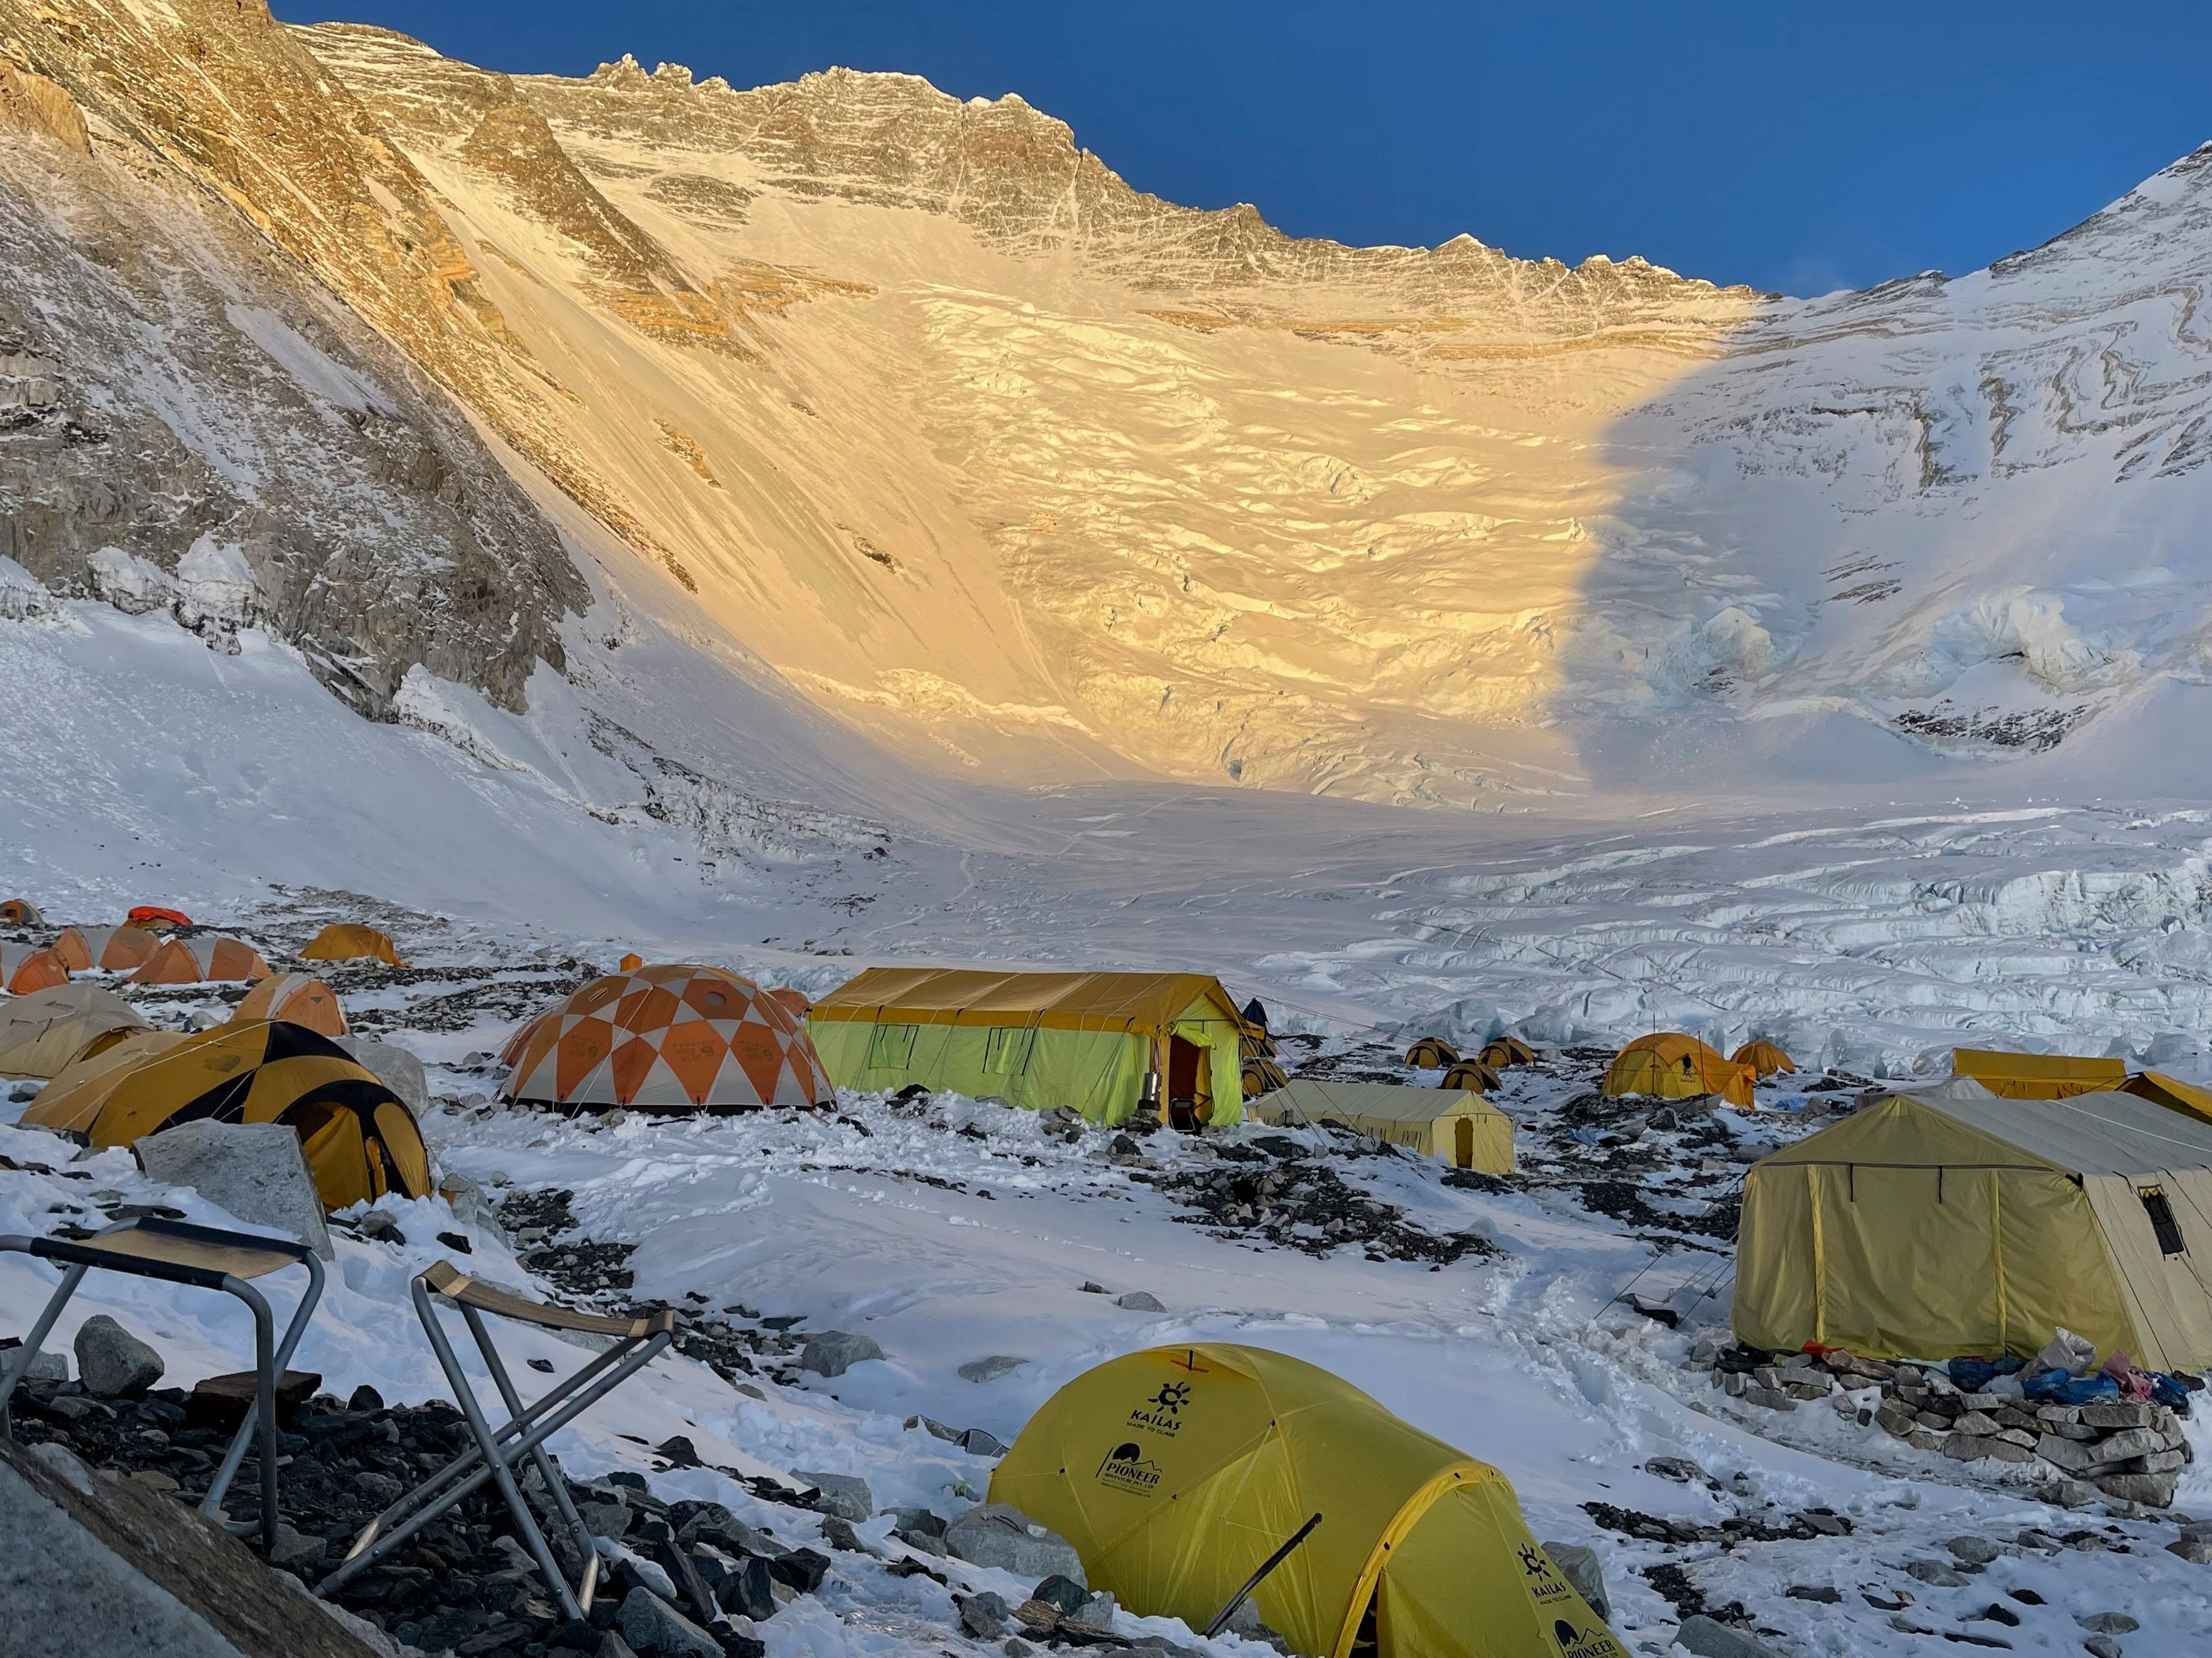 Mountaineer’s tents at Camp 2 of Mount Everest